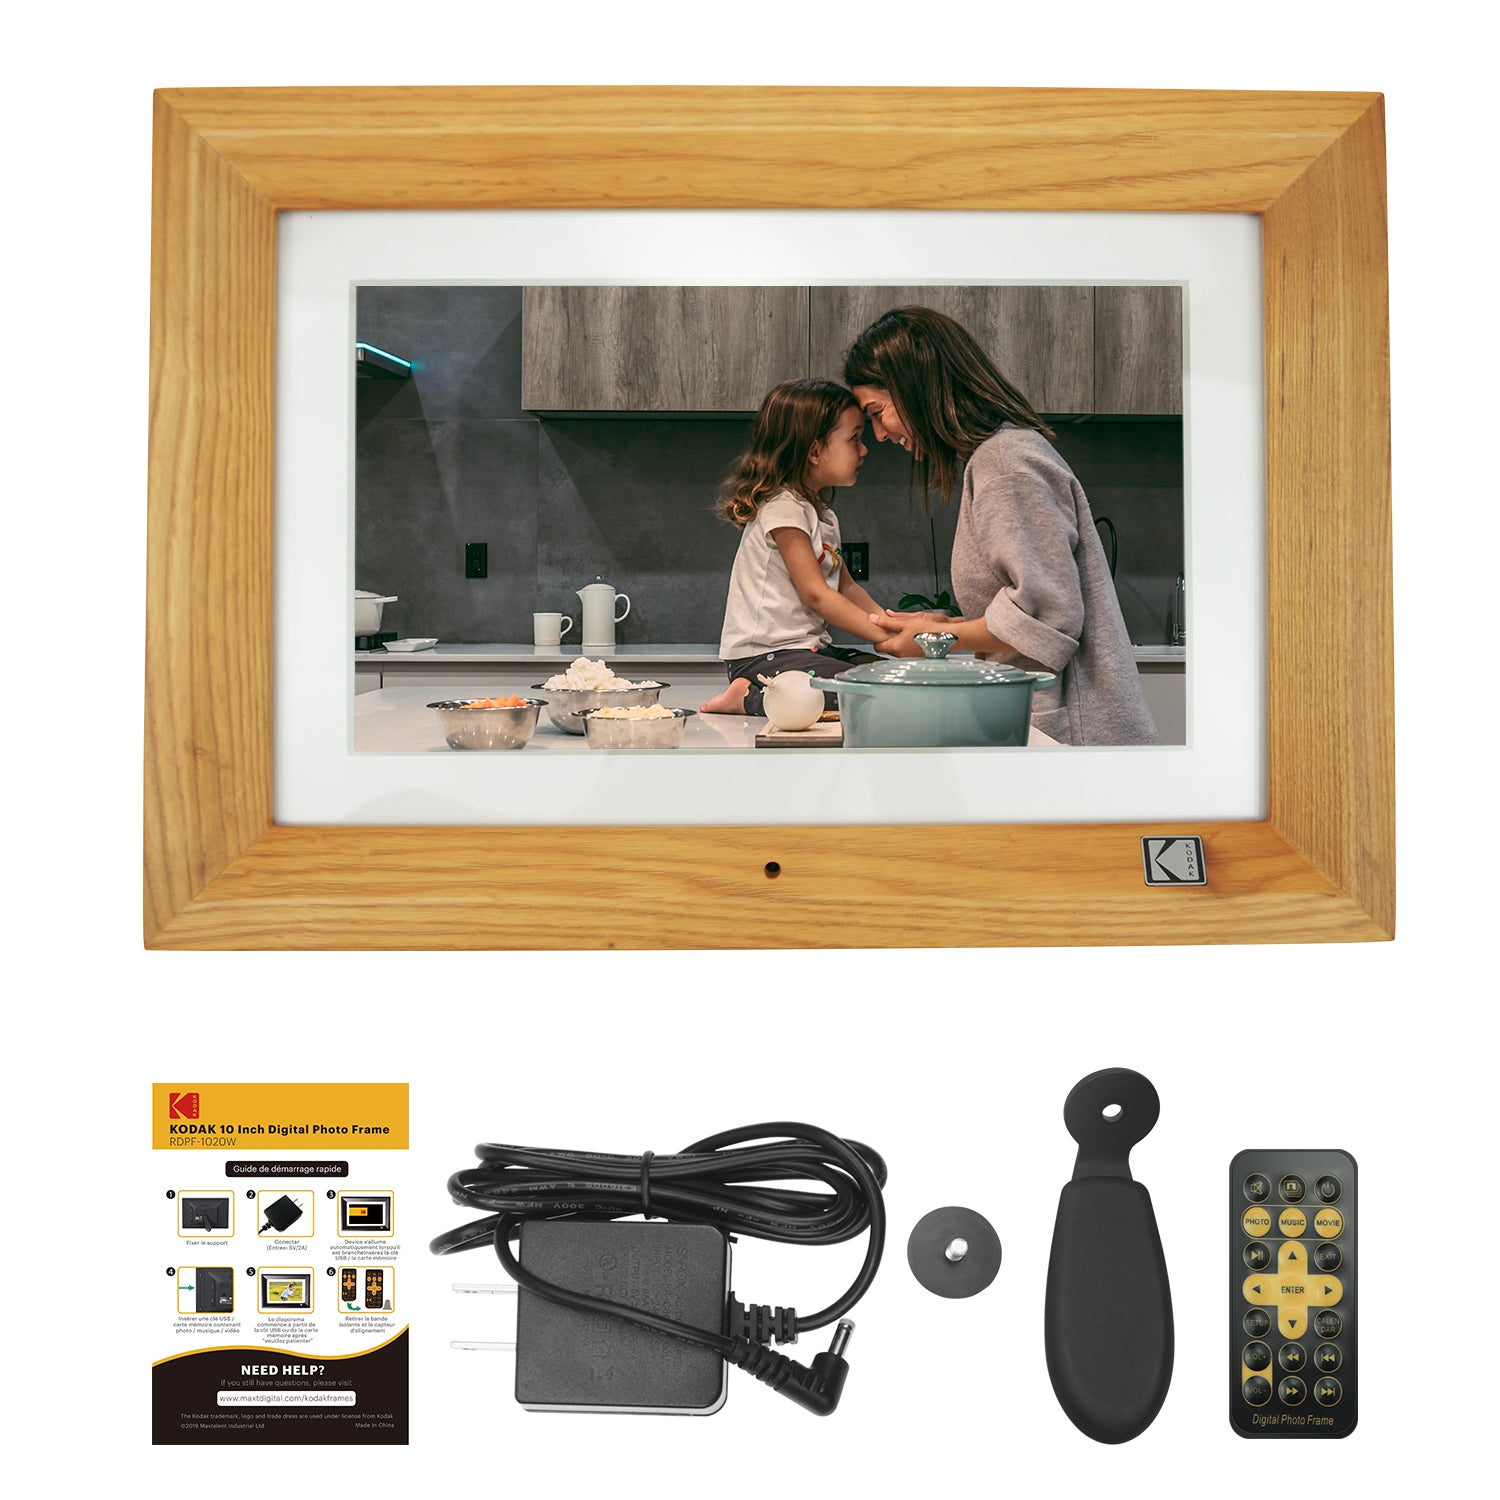 Kodak 10-inch Digital Photo Frame in Burlywood Frame comes with accessories to keep it powered and a controller